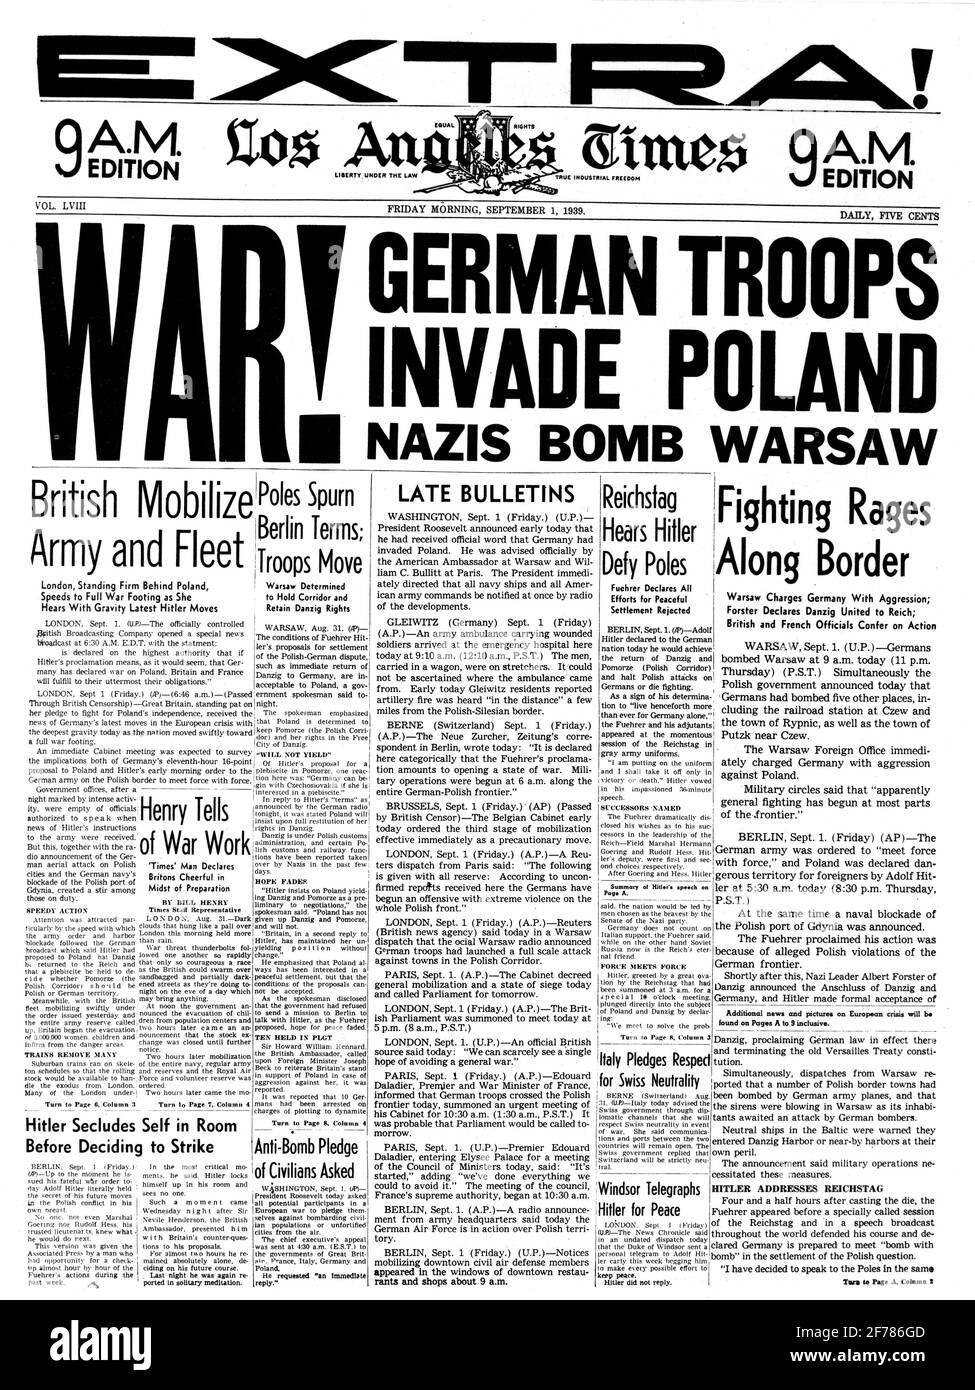 1930s THE LOS ANGELES TIMES NEWSPAPER SEPTEMBER 1 1939 HEADLINES WAR GERMAN TROOPS INVADE POLAND NAZIS BOMB WARSAW CA USA - asp h1089 ASP001 HARS INVADE NAZIS WARSAW BEGINNING BLACK AND WHITE LOS ANGELES OLD FASHIONED Stock Photo